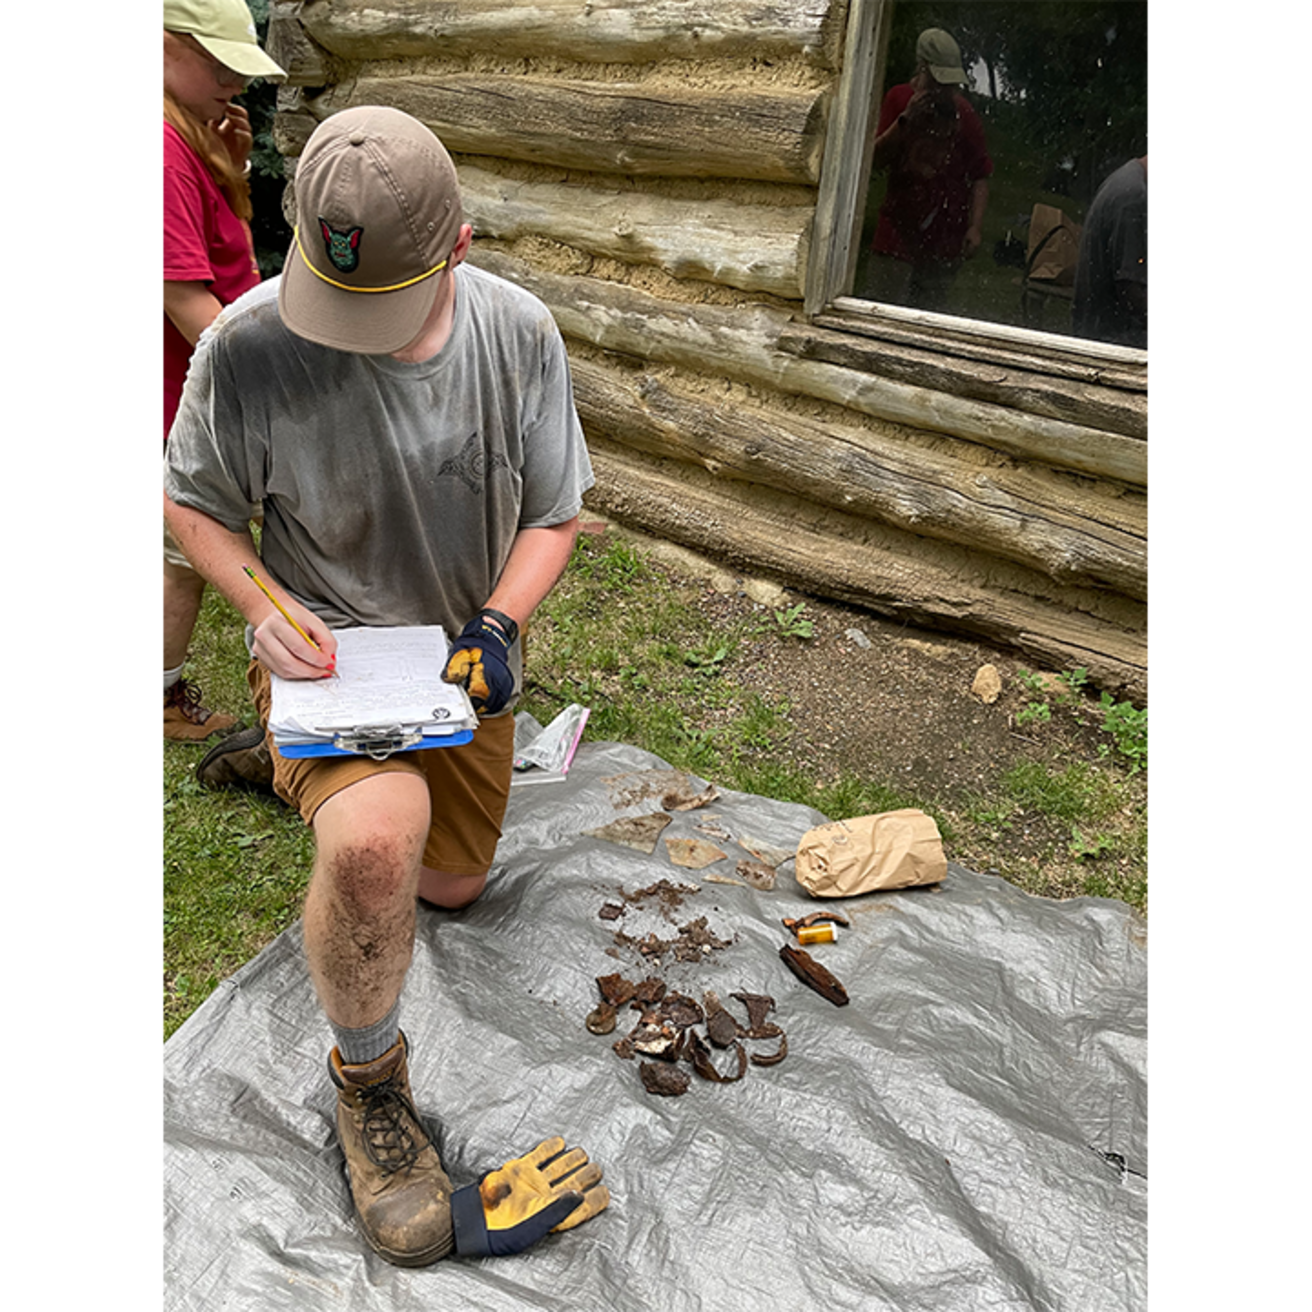 A student kneels on a tarp and takes notes about artifacts